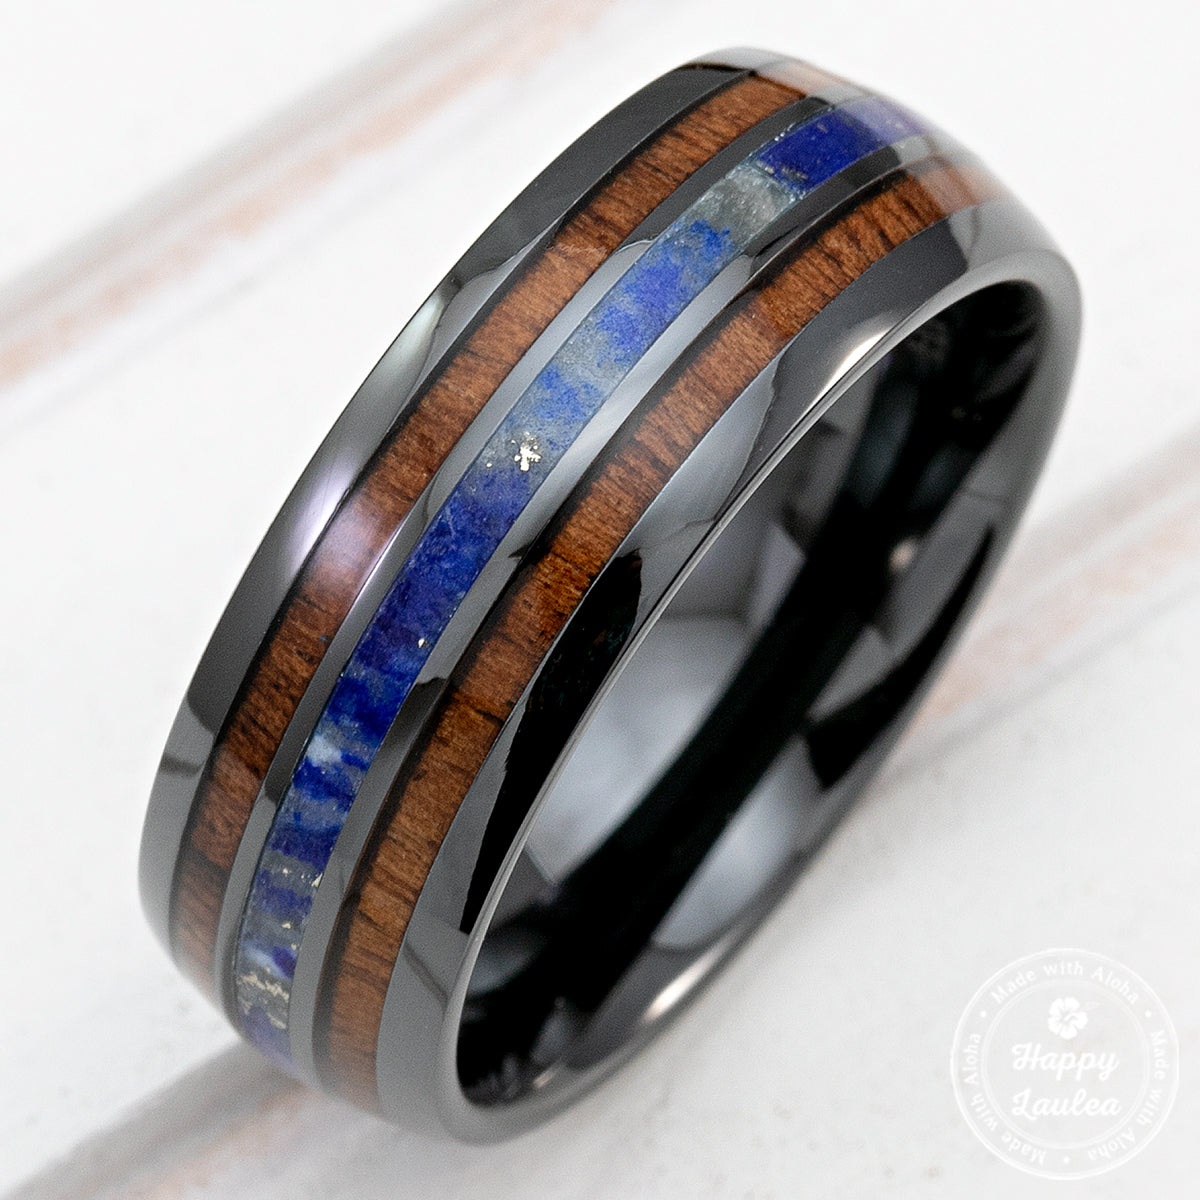 Black Ceramic Ring with Koa Wood & Lapis Tri-Inlay - 8mm, Dome Shape, Comfort Fitment